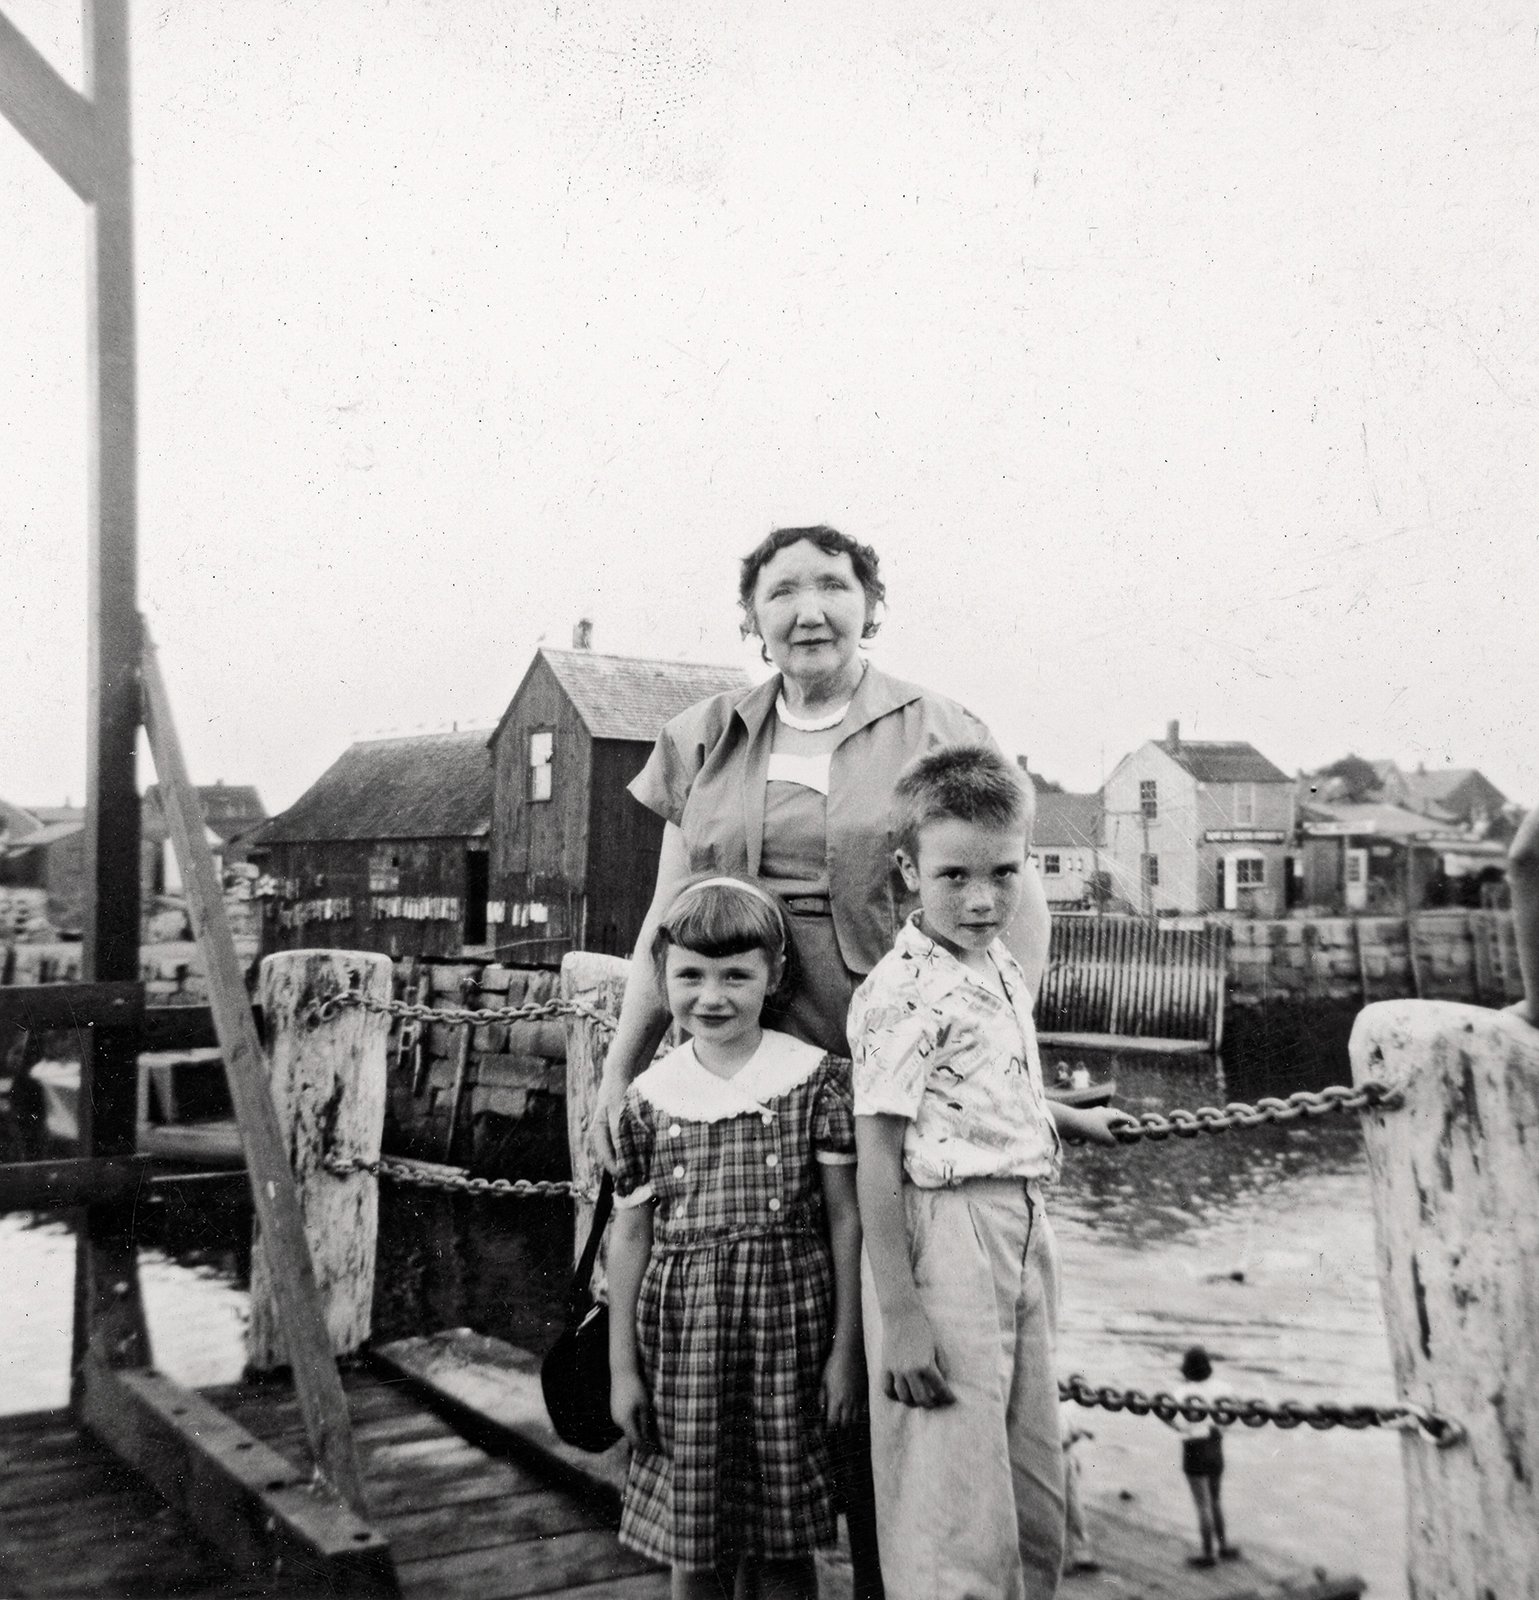 Moira (9) and brother Brendan (11) Kennedy in Rockport, Massachusetts, with Winnie Delaney, a cousin of their grandmother, Maggie Bergin Driscoll, who was originally from County Offaly. Winnie, from Jersey City, New Jersey was enjoying a scenic tour of the area, c. 1954.